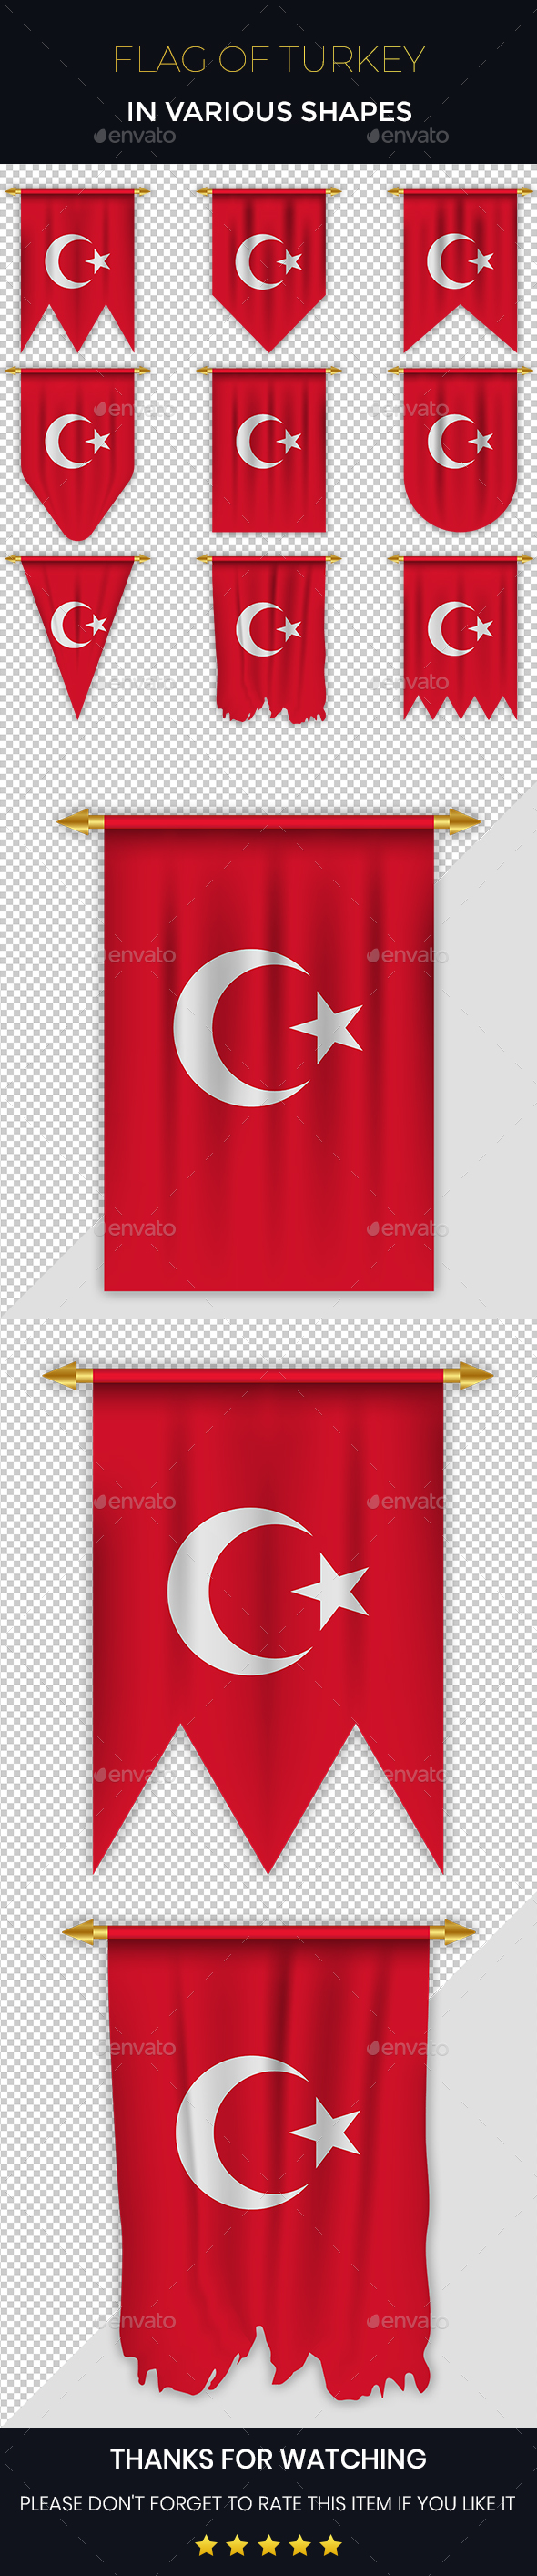 Turkey Flag in Various Shapes